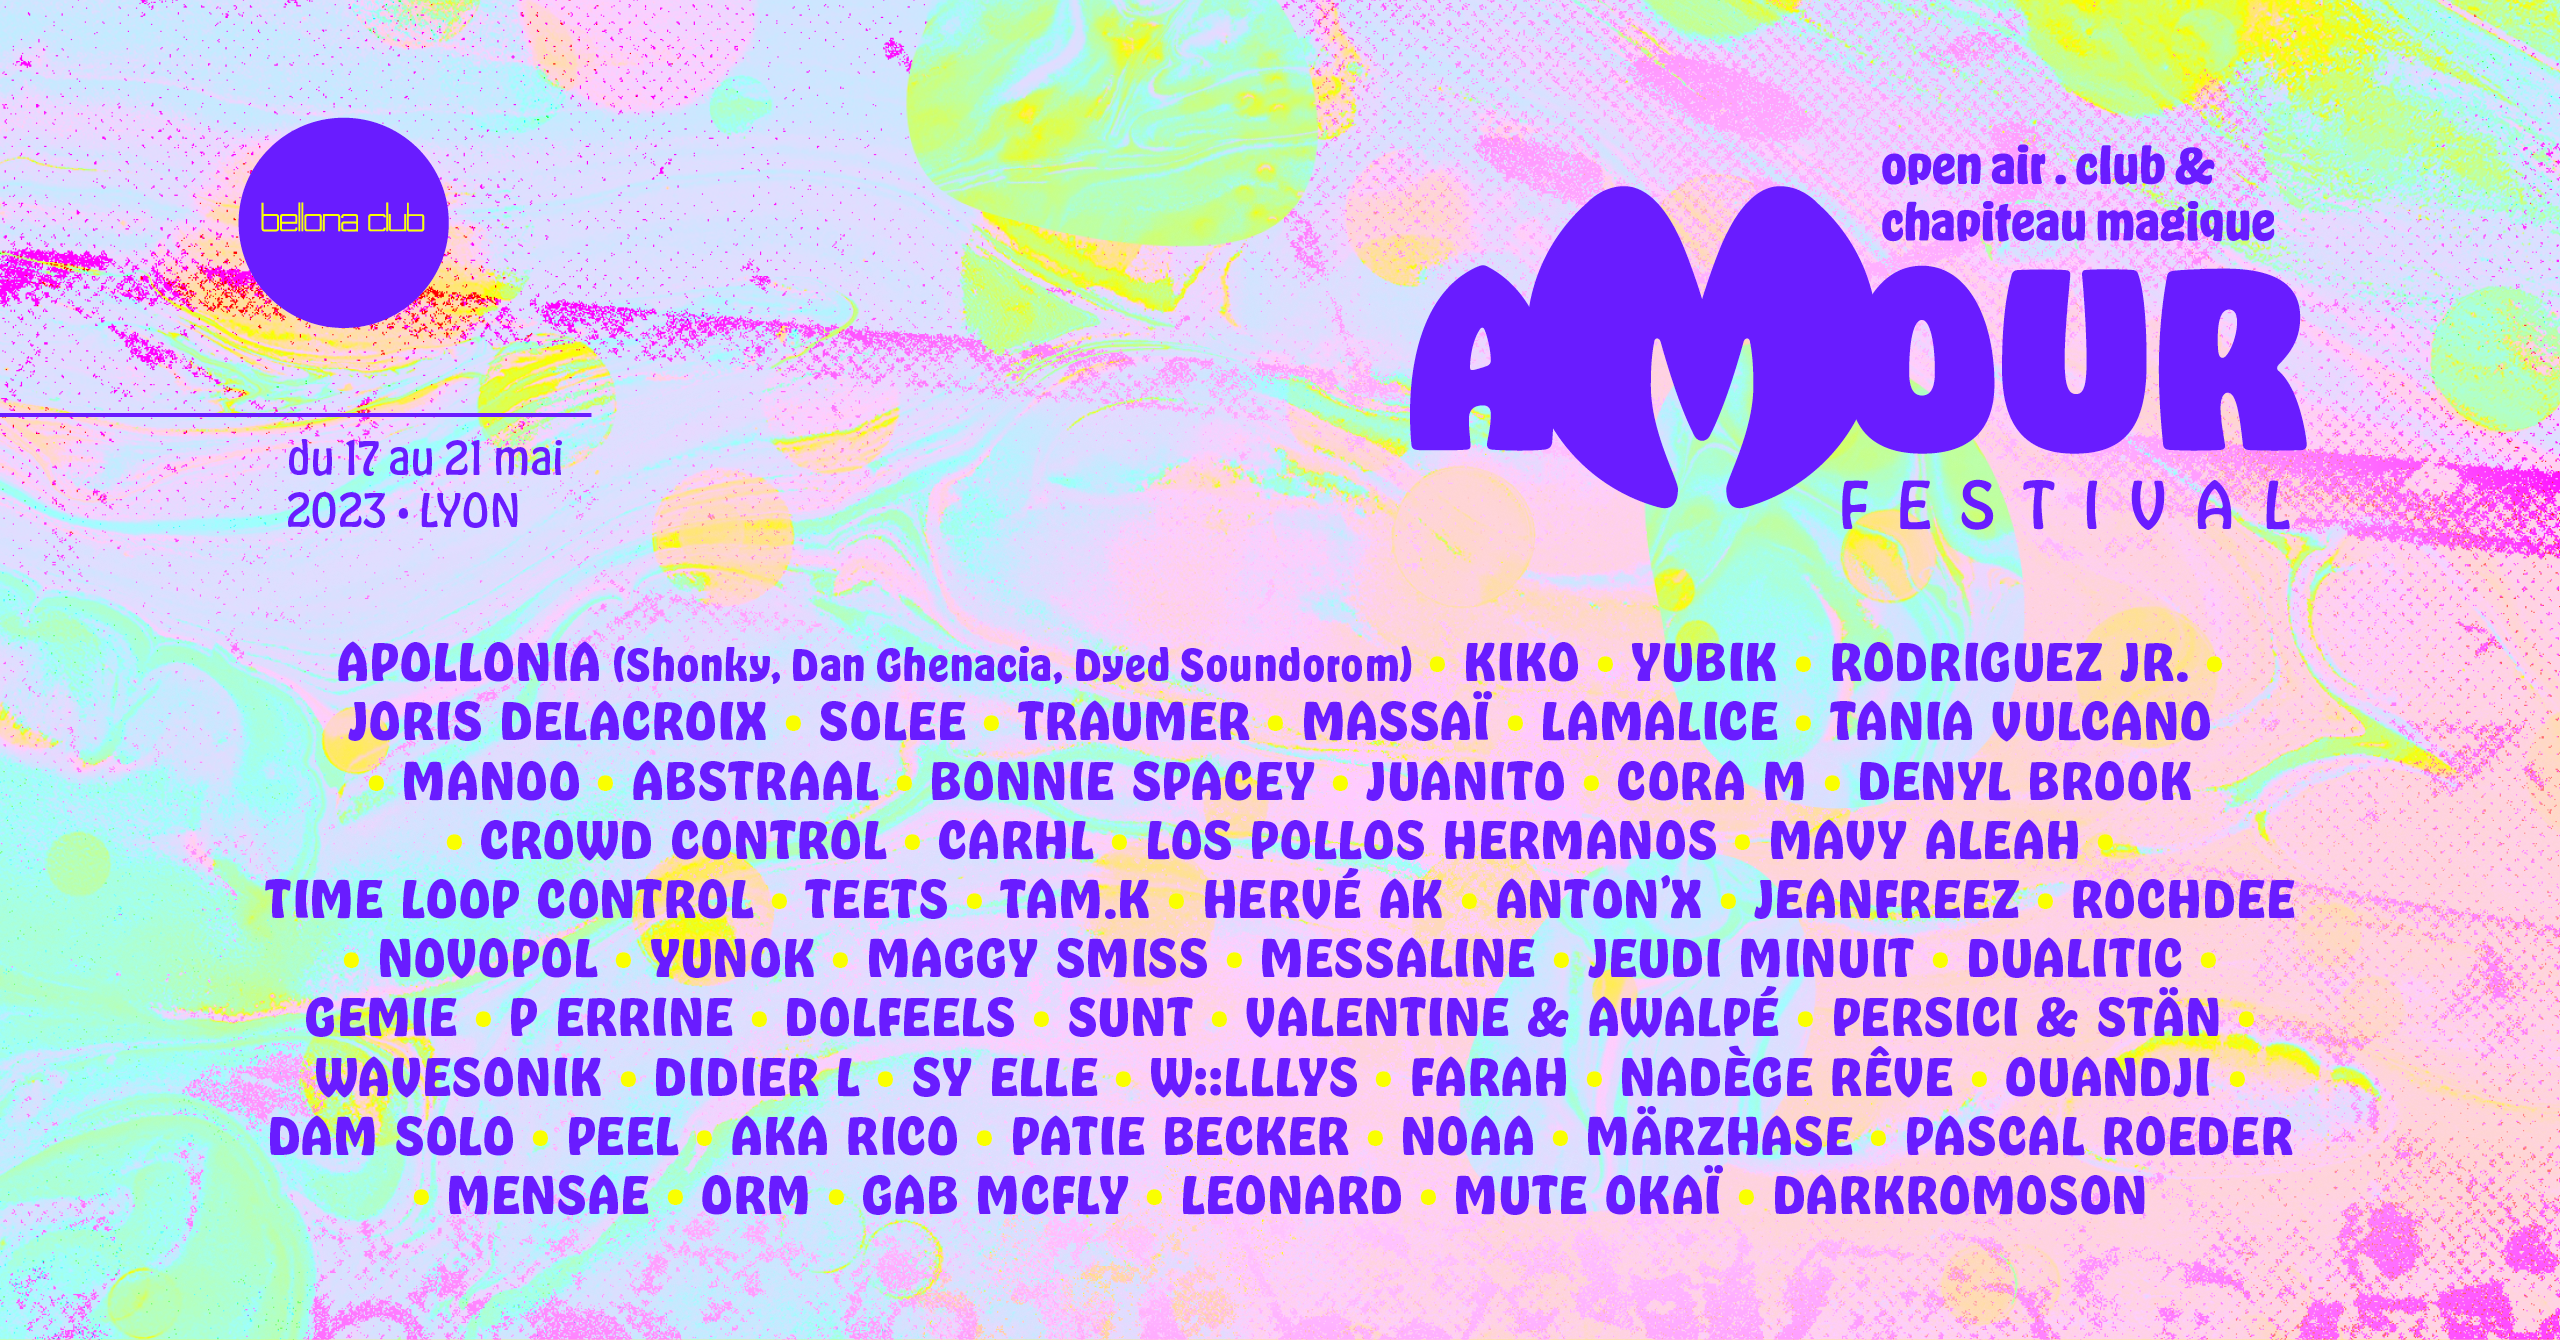 AMOUR FESTIVAL OPEN AIR & CLUB - フライヤー表